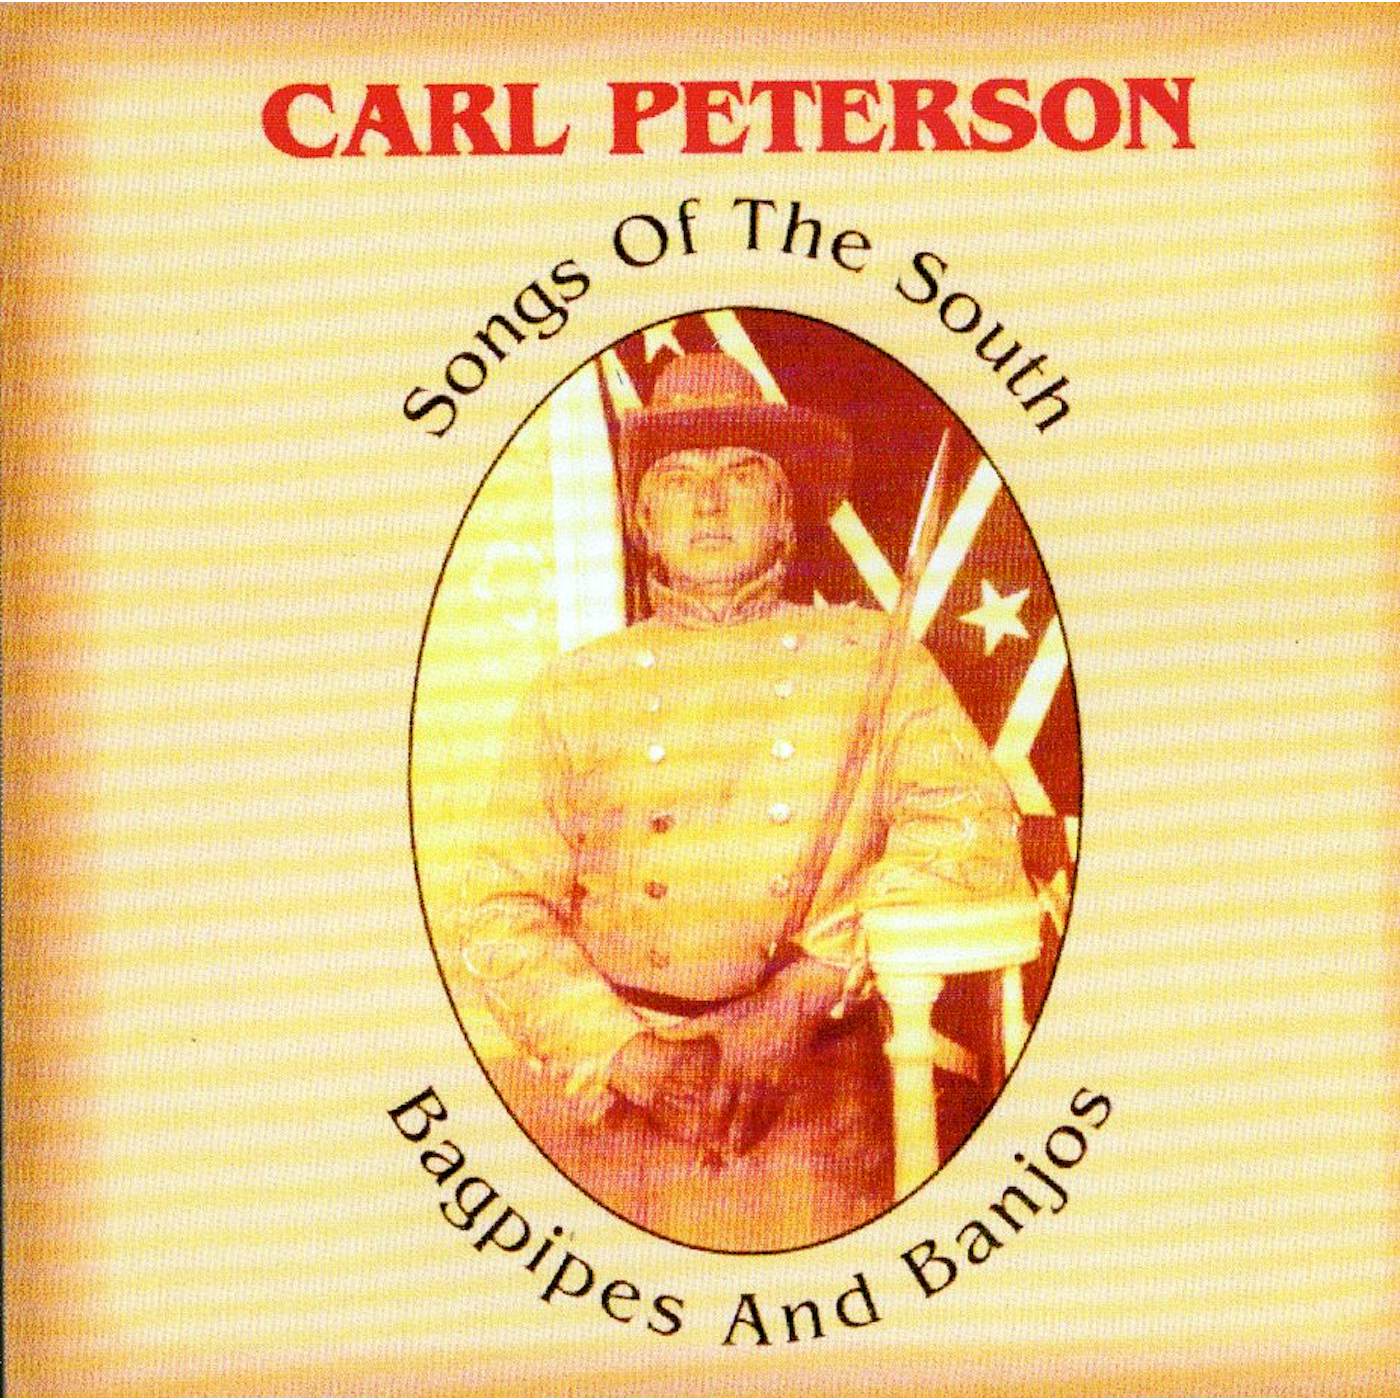 Carl Peterson SONGS OF THE SOUTH: BAGPIPES & BANJOS CD